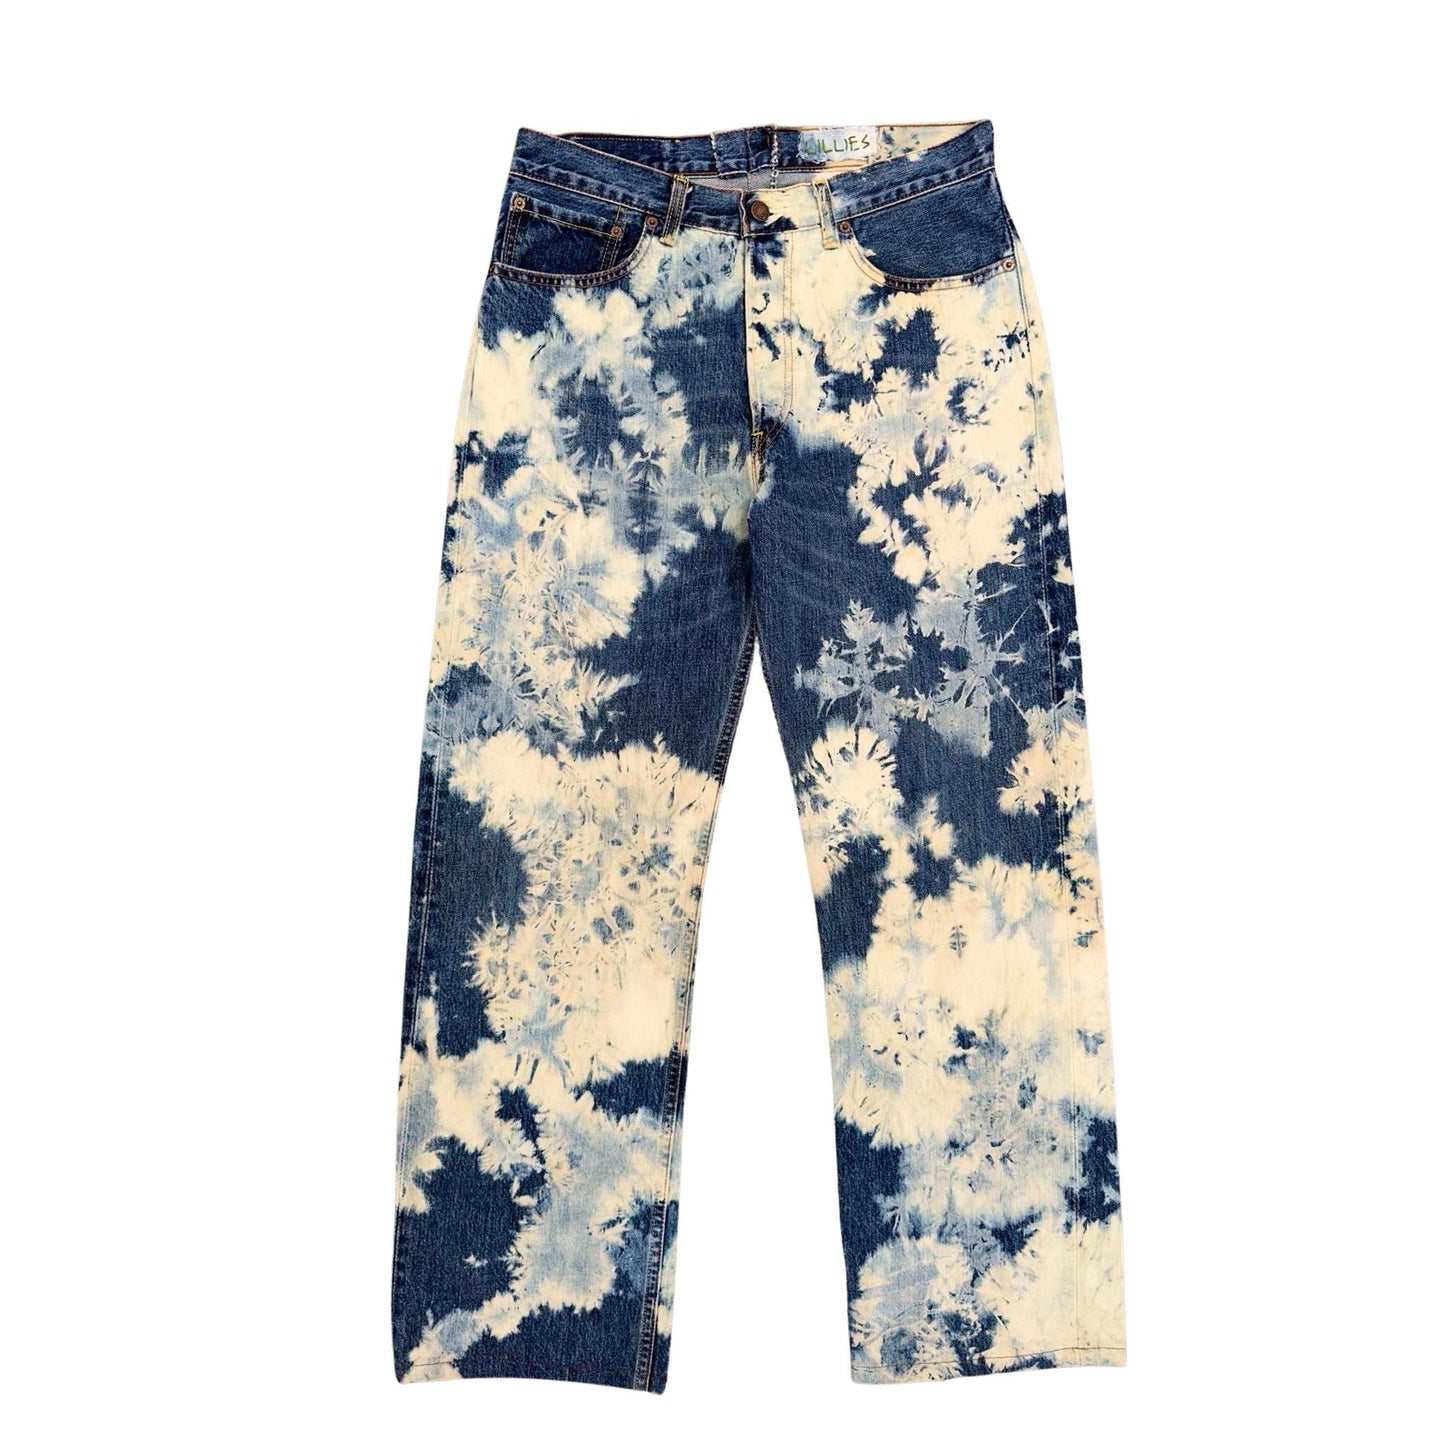 The Frost Jeans are a pair of classic blue, vintage wide leg jeans that have been hand-bleached using a unique technique giving the jean an appearance of frost.